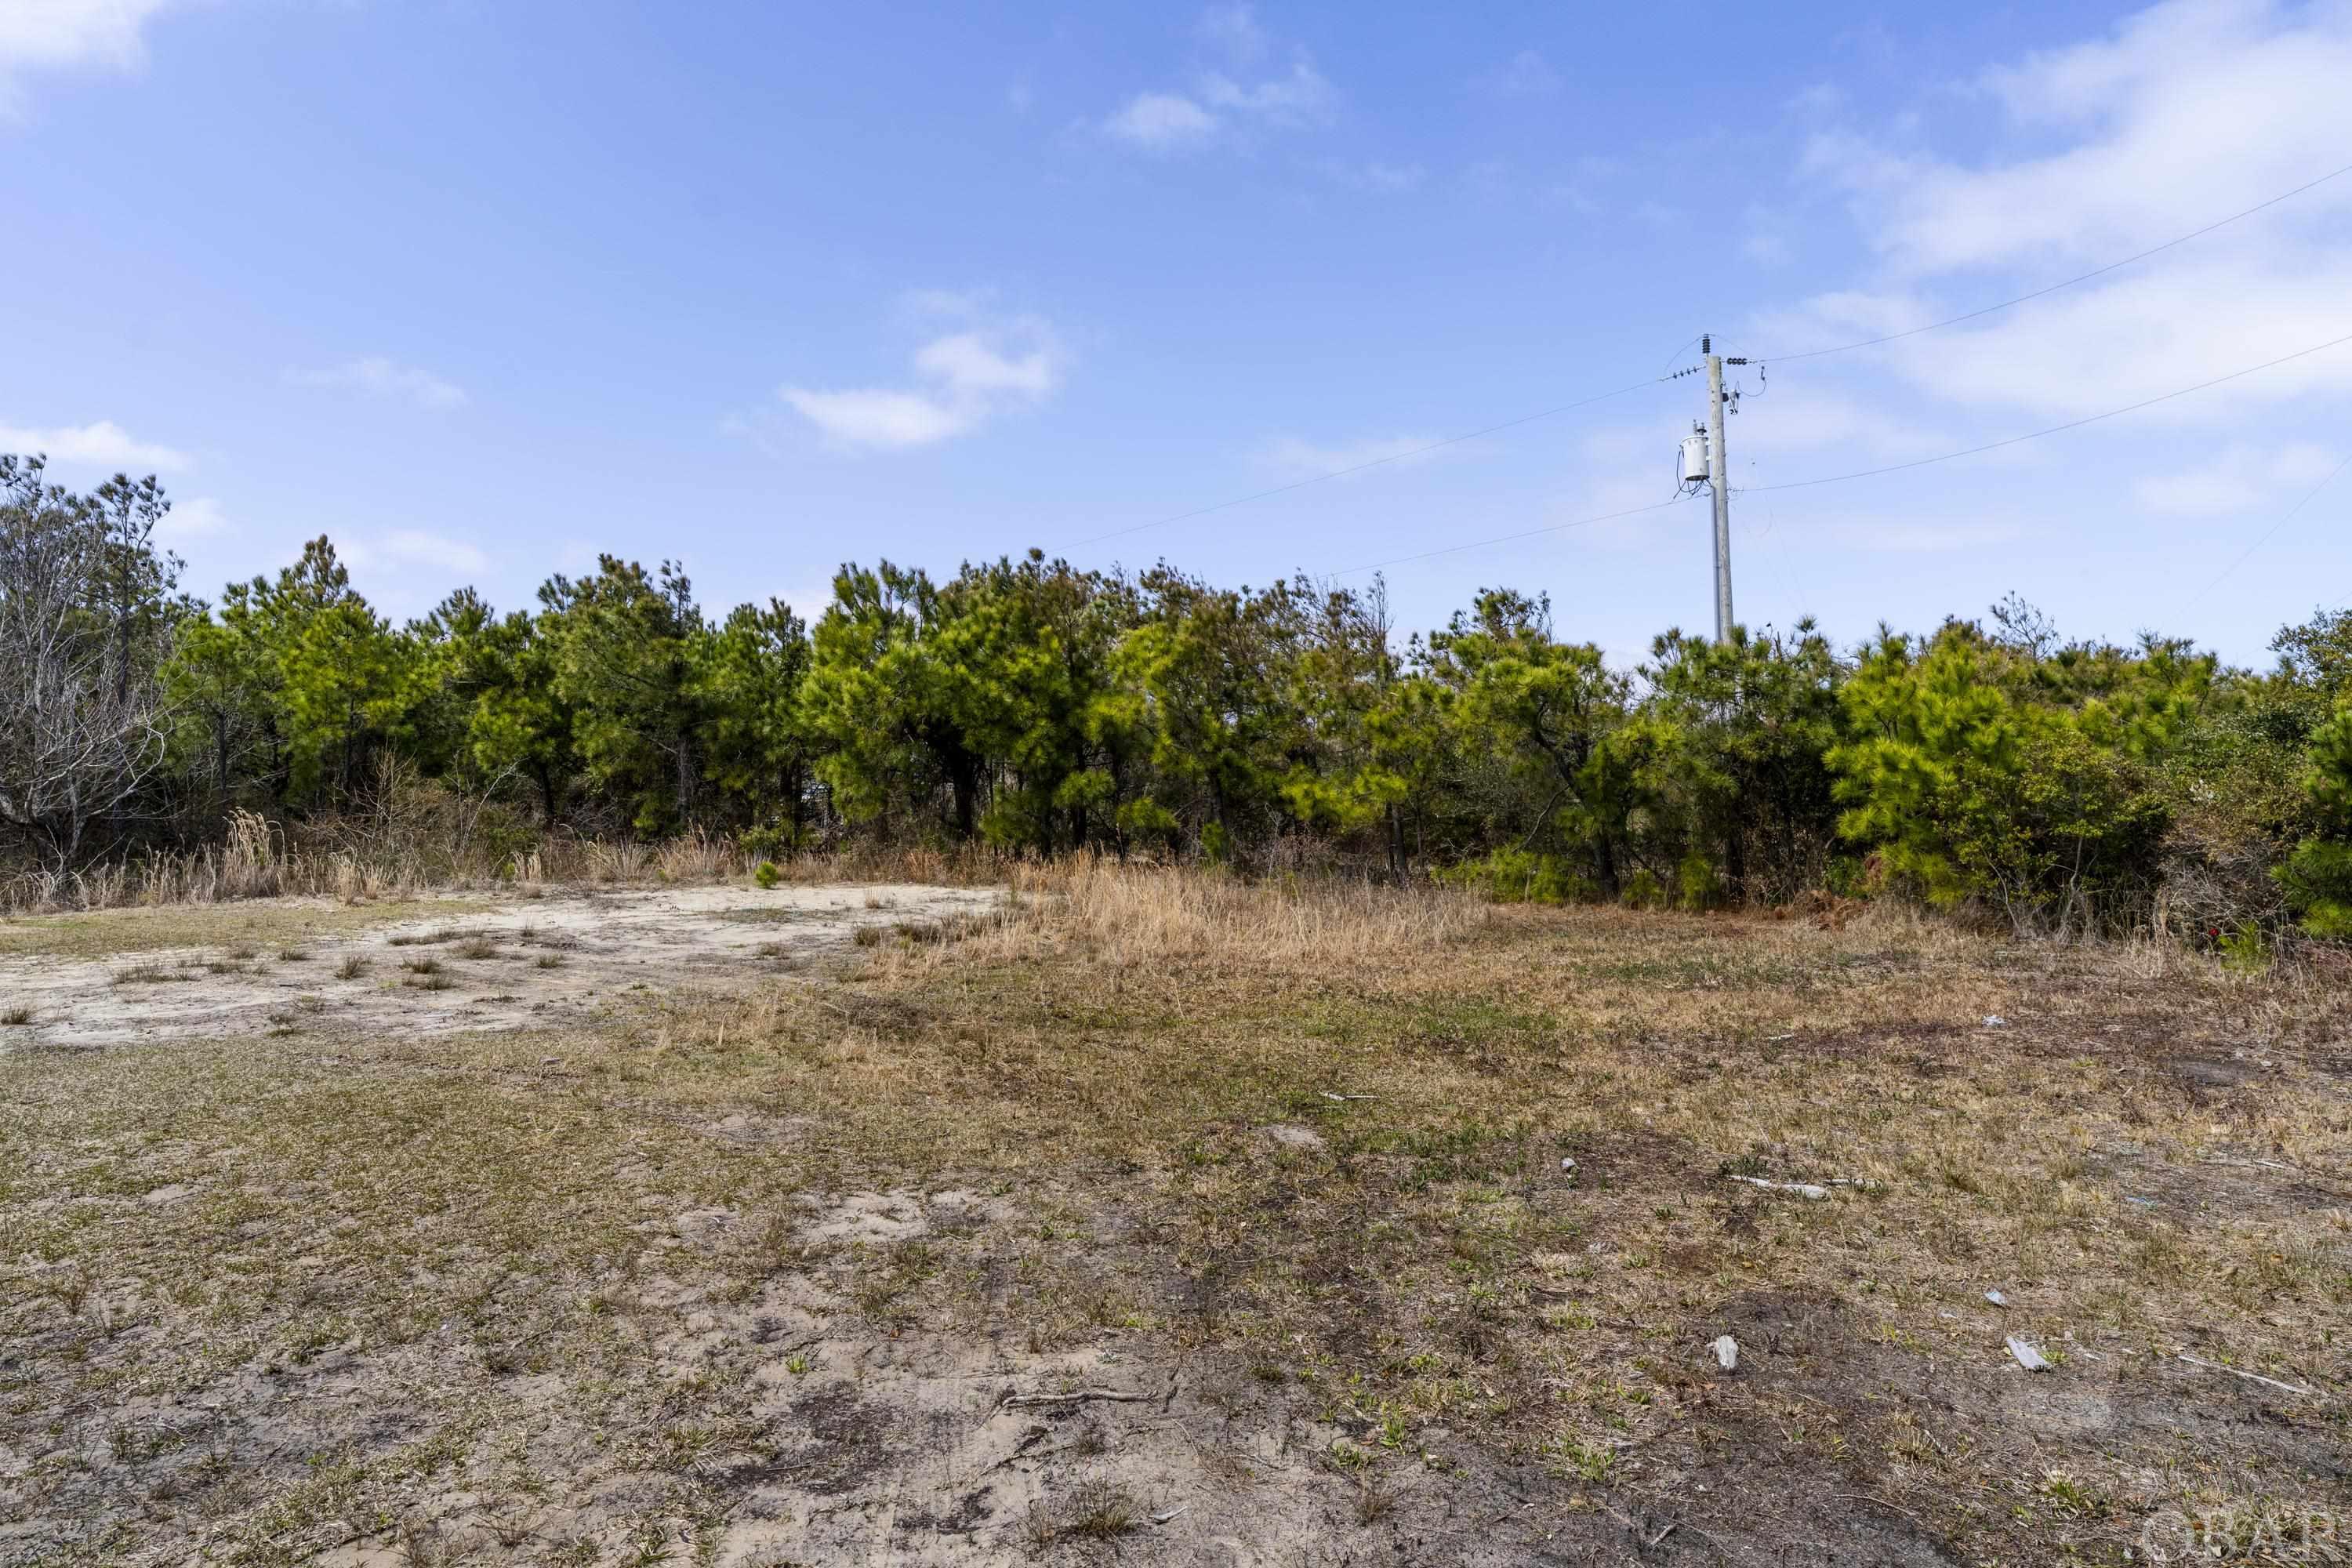 Fantastic opportunity to own this cleared corner 4th row lot in Carova Beach!  Located in the desirable X flood zone, the owners have cleared the lot, had it surveyed, and performed a soil test resulting in a huge cost savings for the future Buyer.  This would make an ideal location for a second home or a weekly vacation rental.  A future 2 story home will have ocean views!  Come check out this private location on the remote 4wd beaches of Carova known for its natural beauty and the resident wild horses that roam freely through the area.